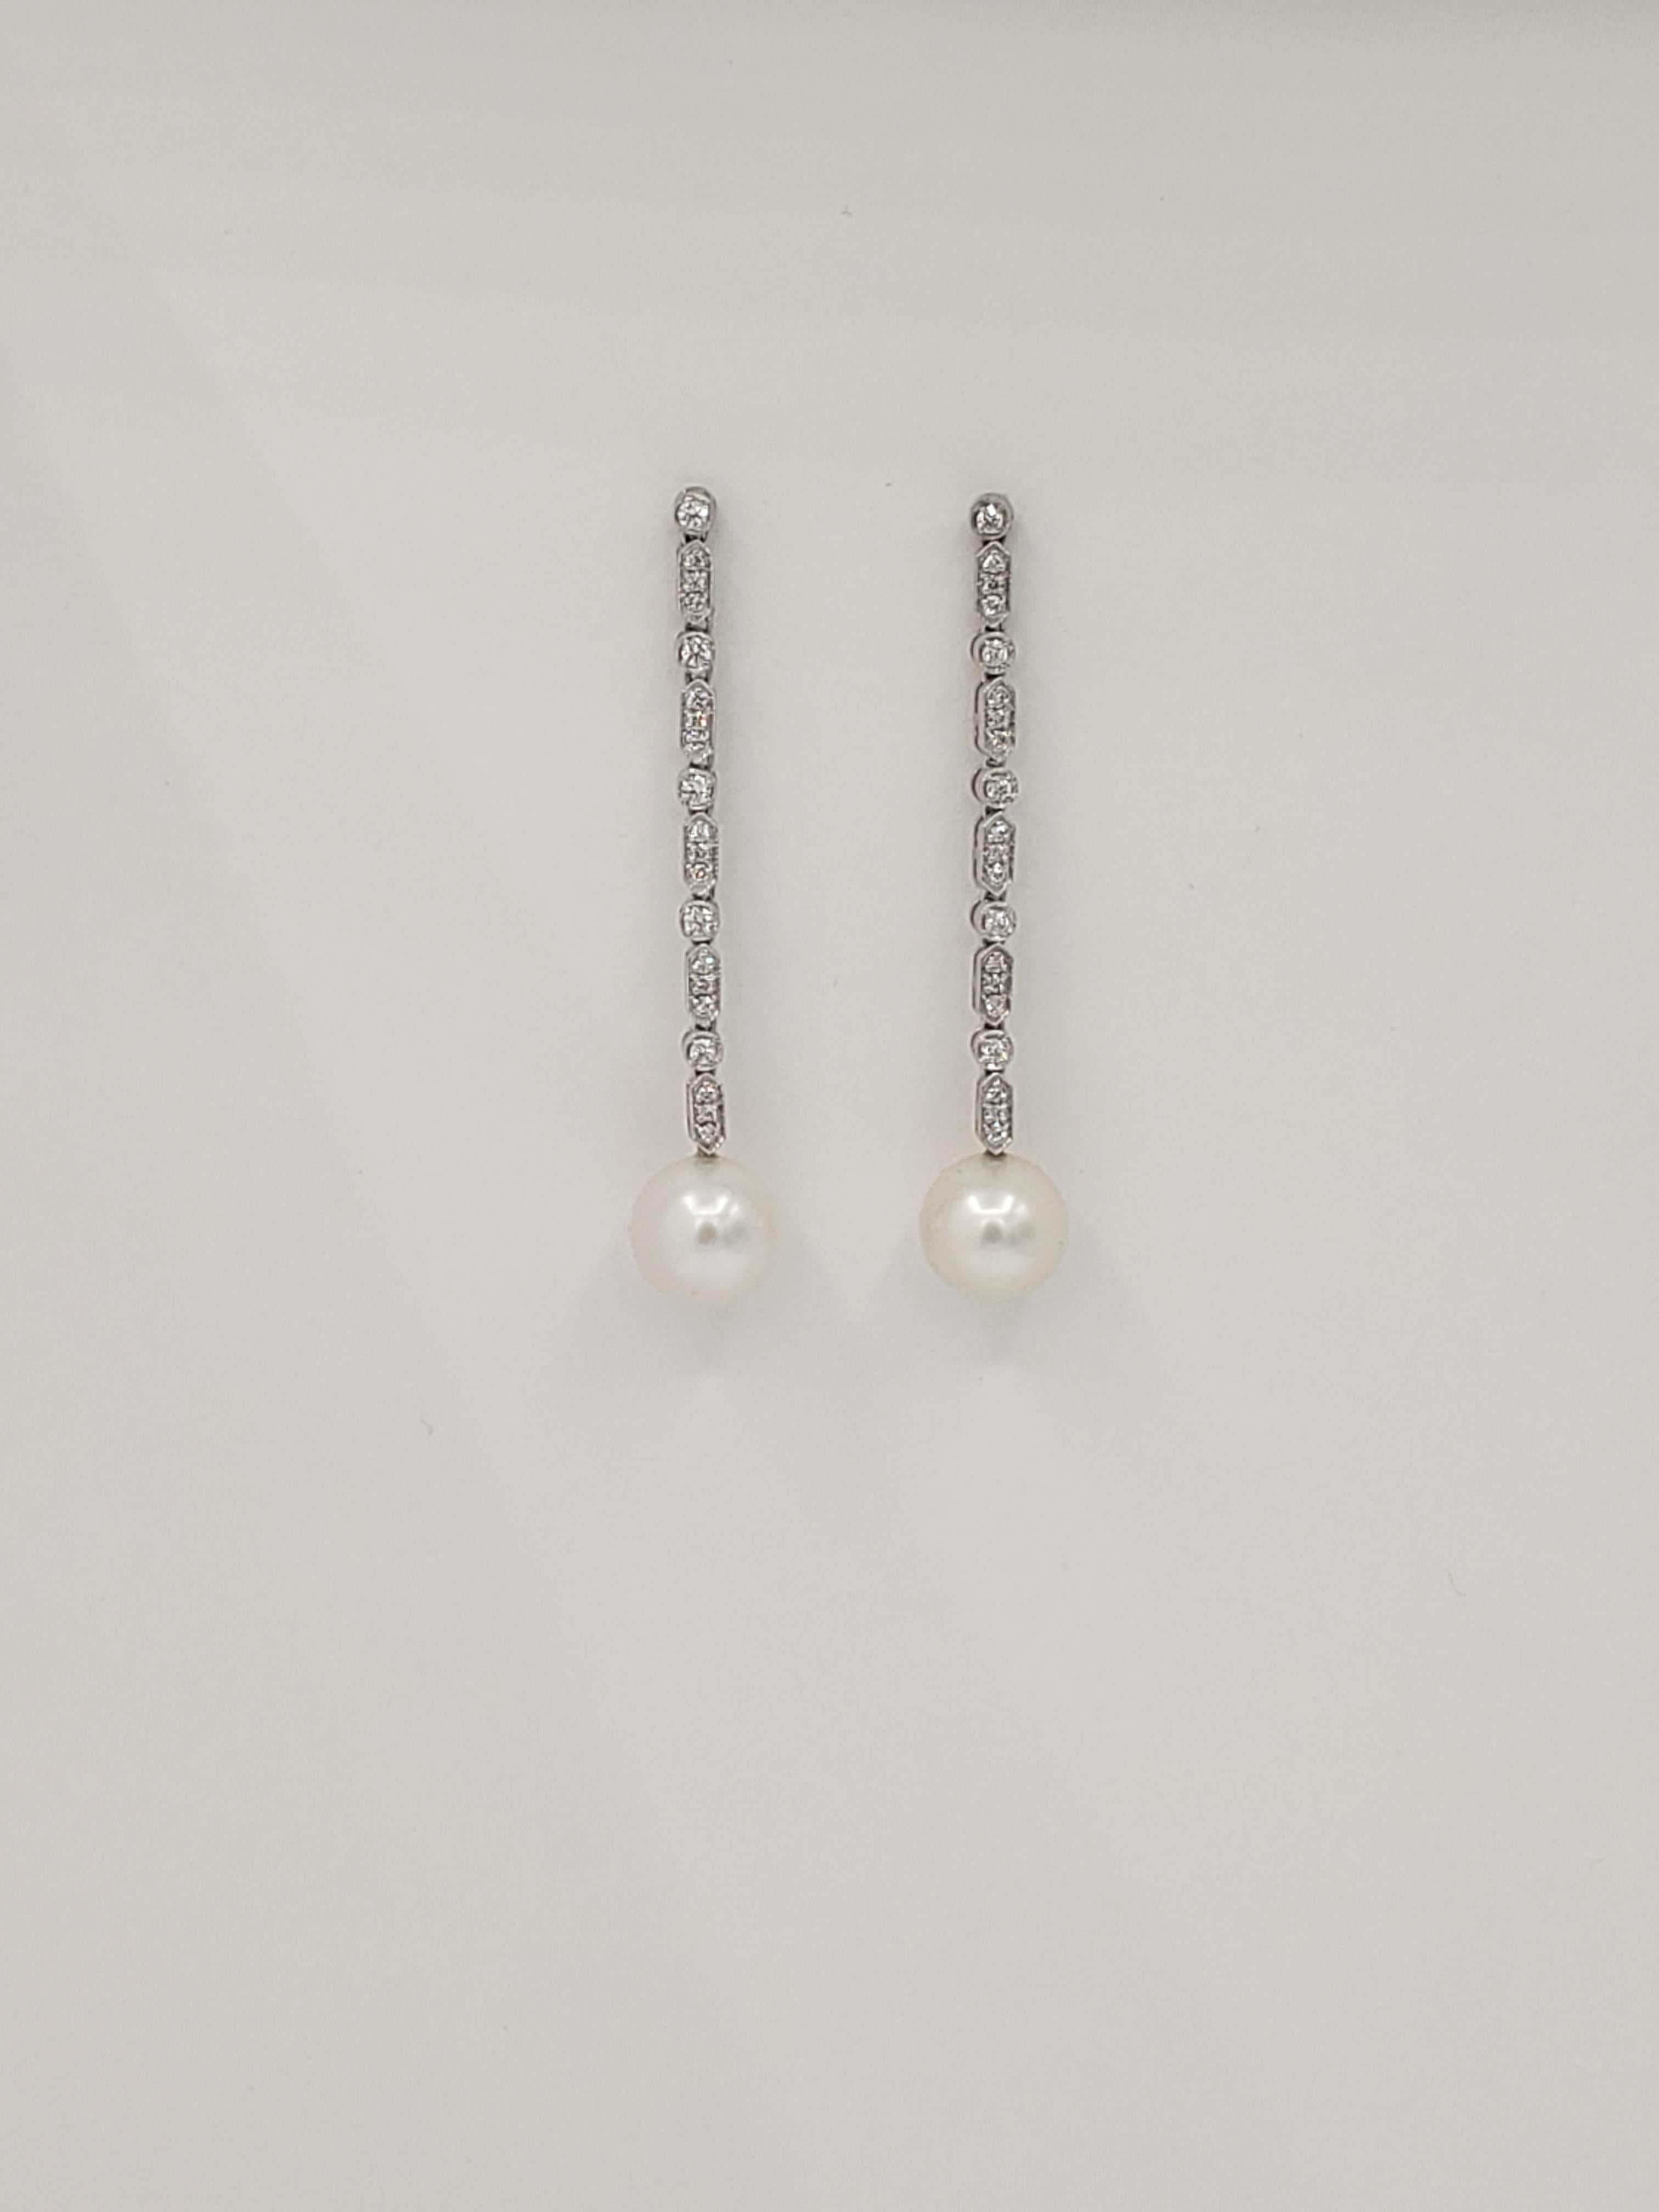 are pearls perfectly round